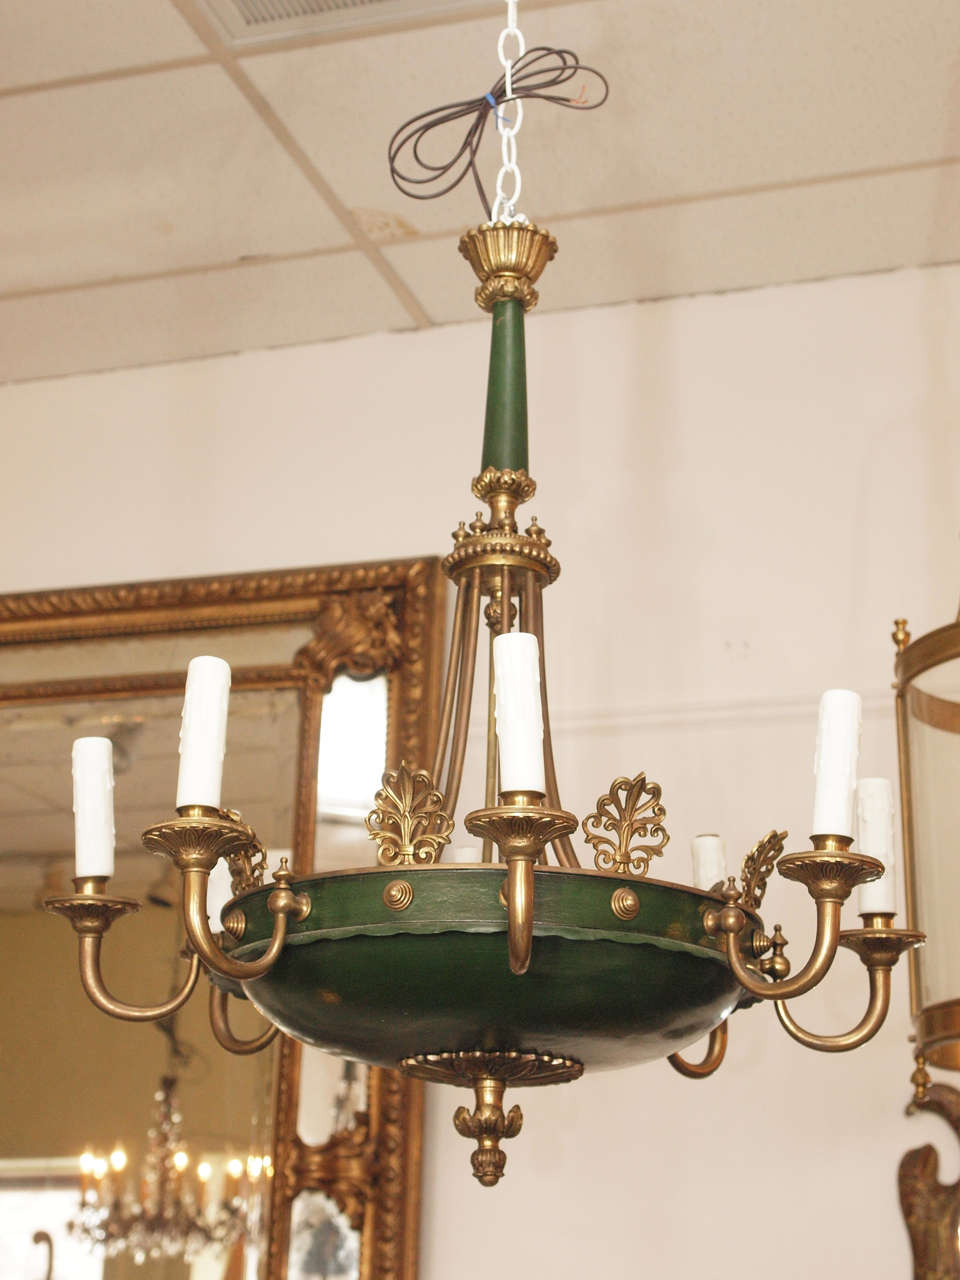 Early 20th c. French, Empire, style chandelier.  The tole painted dish is mounted with bronze reticulated anthemia and eight bronze candle branches which support leaf-molded drip pans and candle cups holding beeswax candle sleeves. A leaf-molded